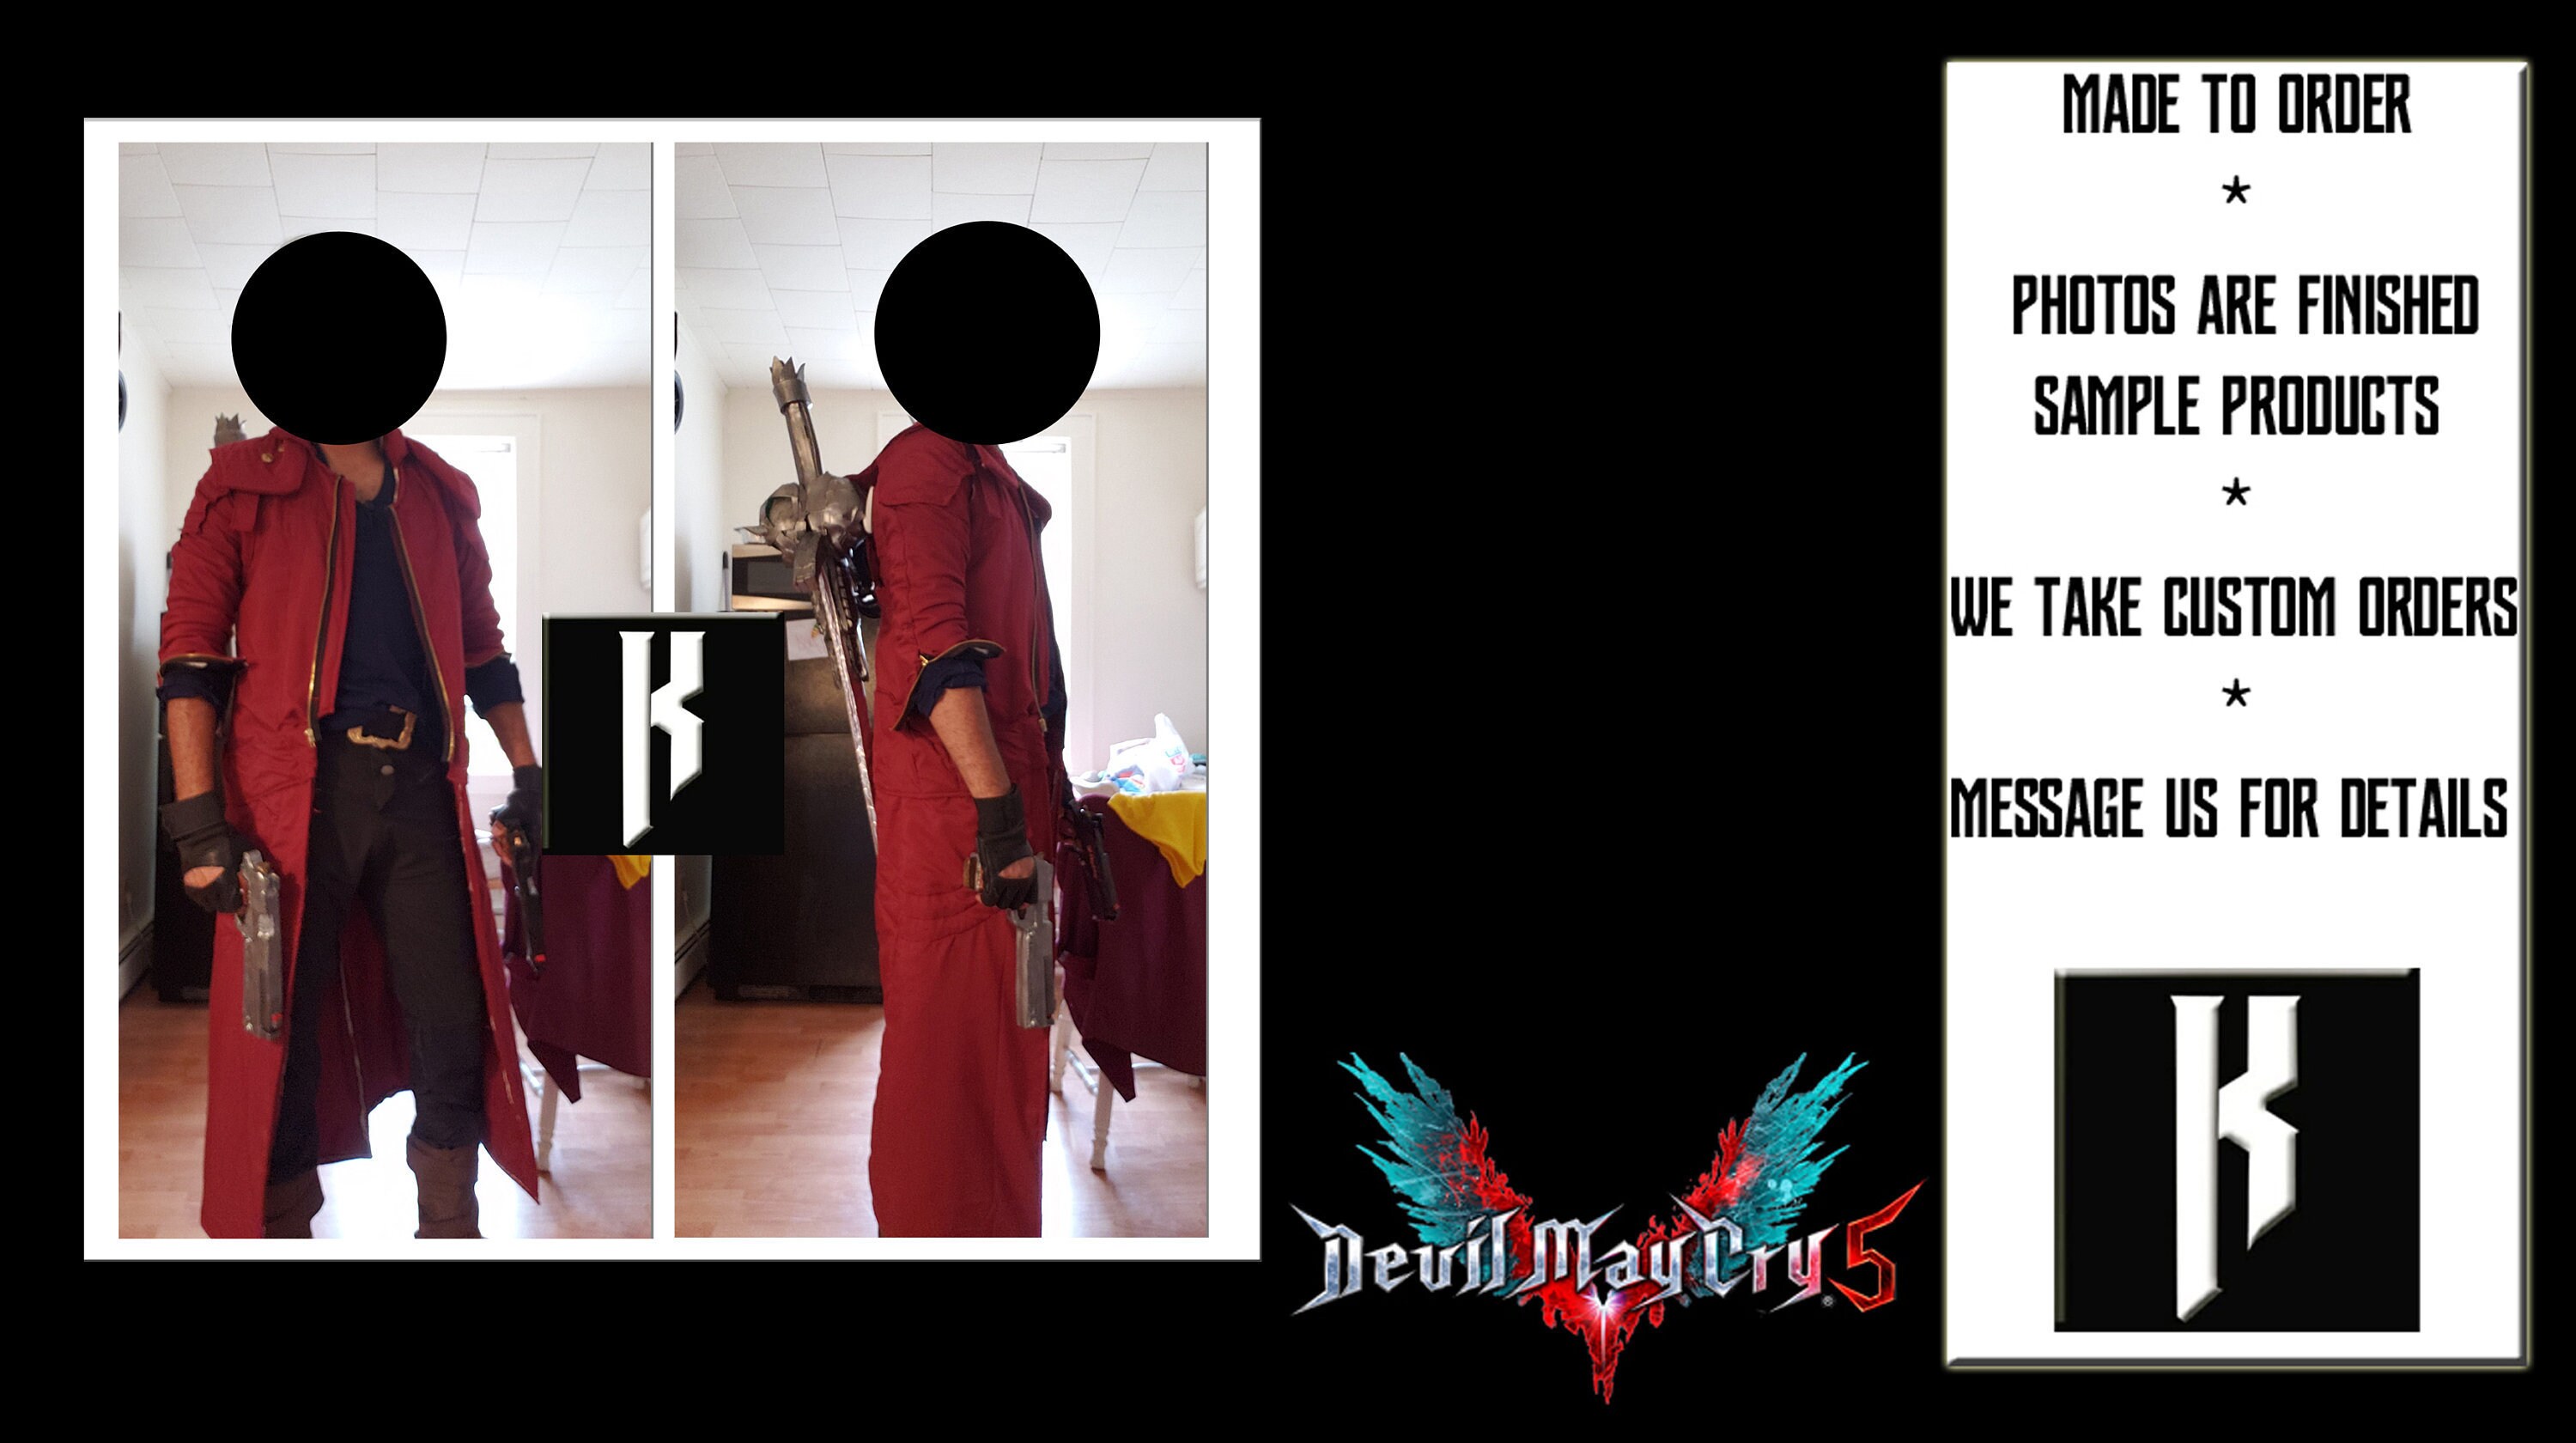 Devil May Cry 5 Video Game Dante Cosplay Costume